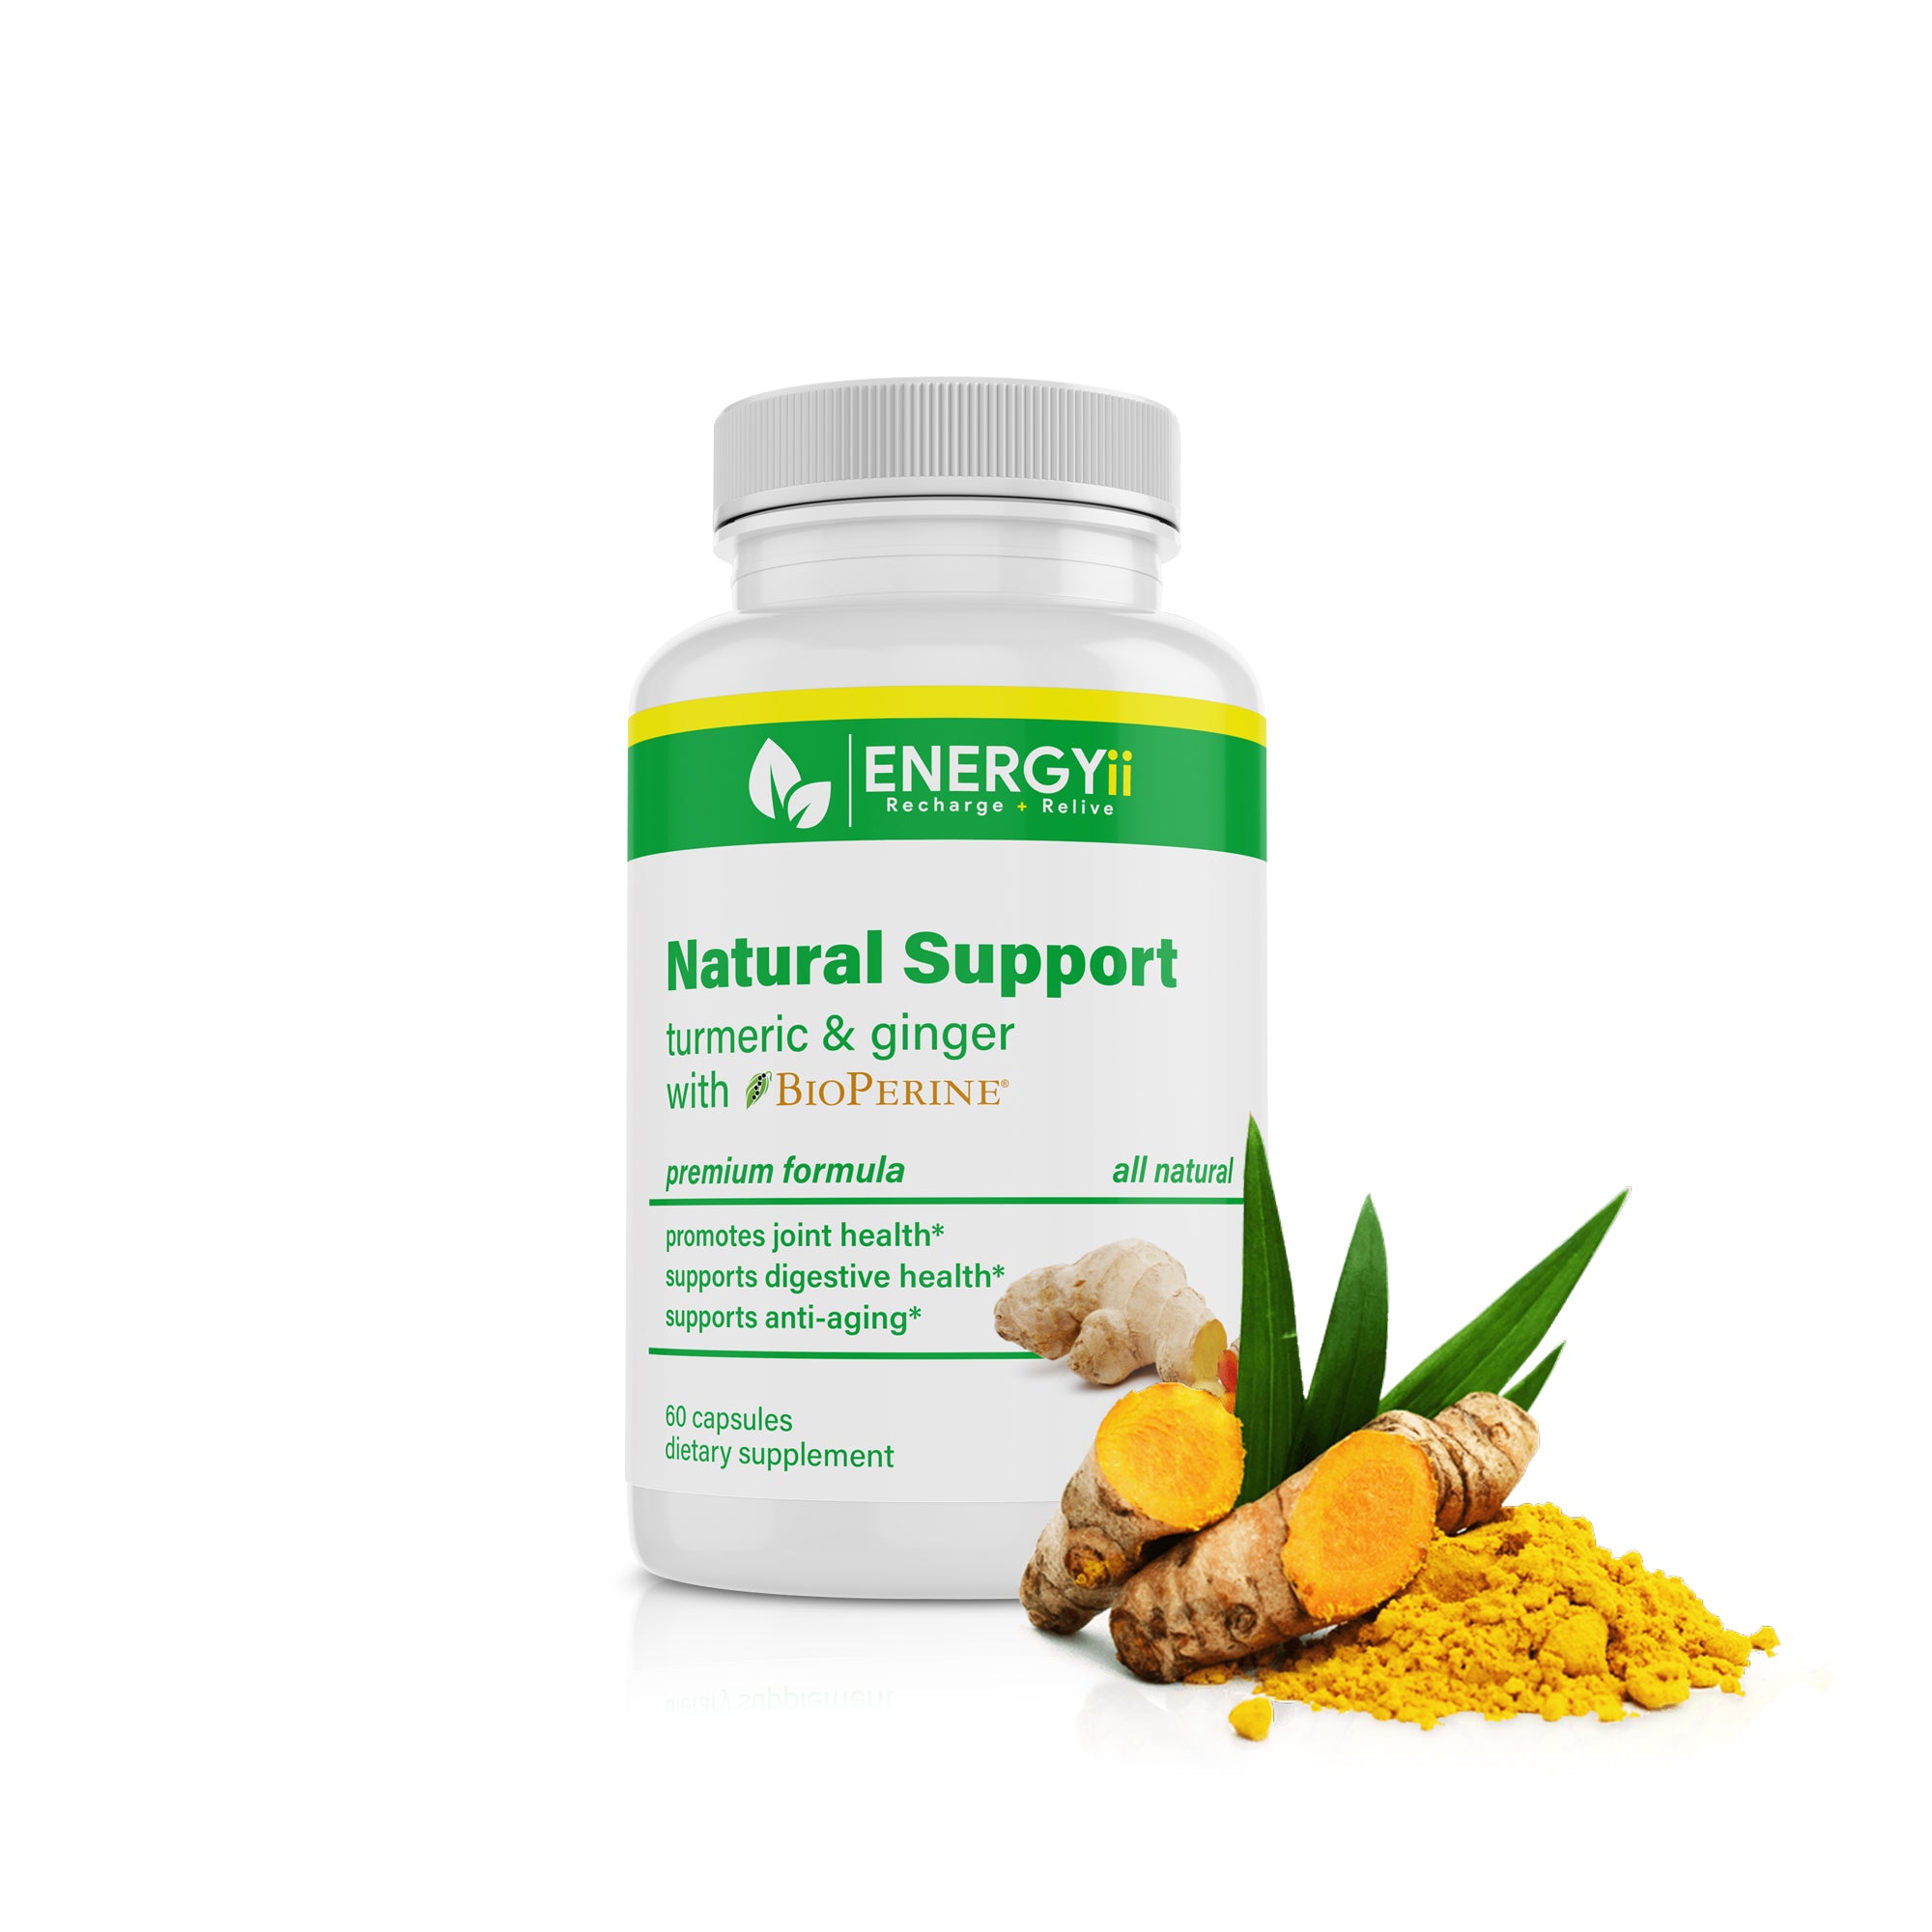 Natural Support